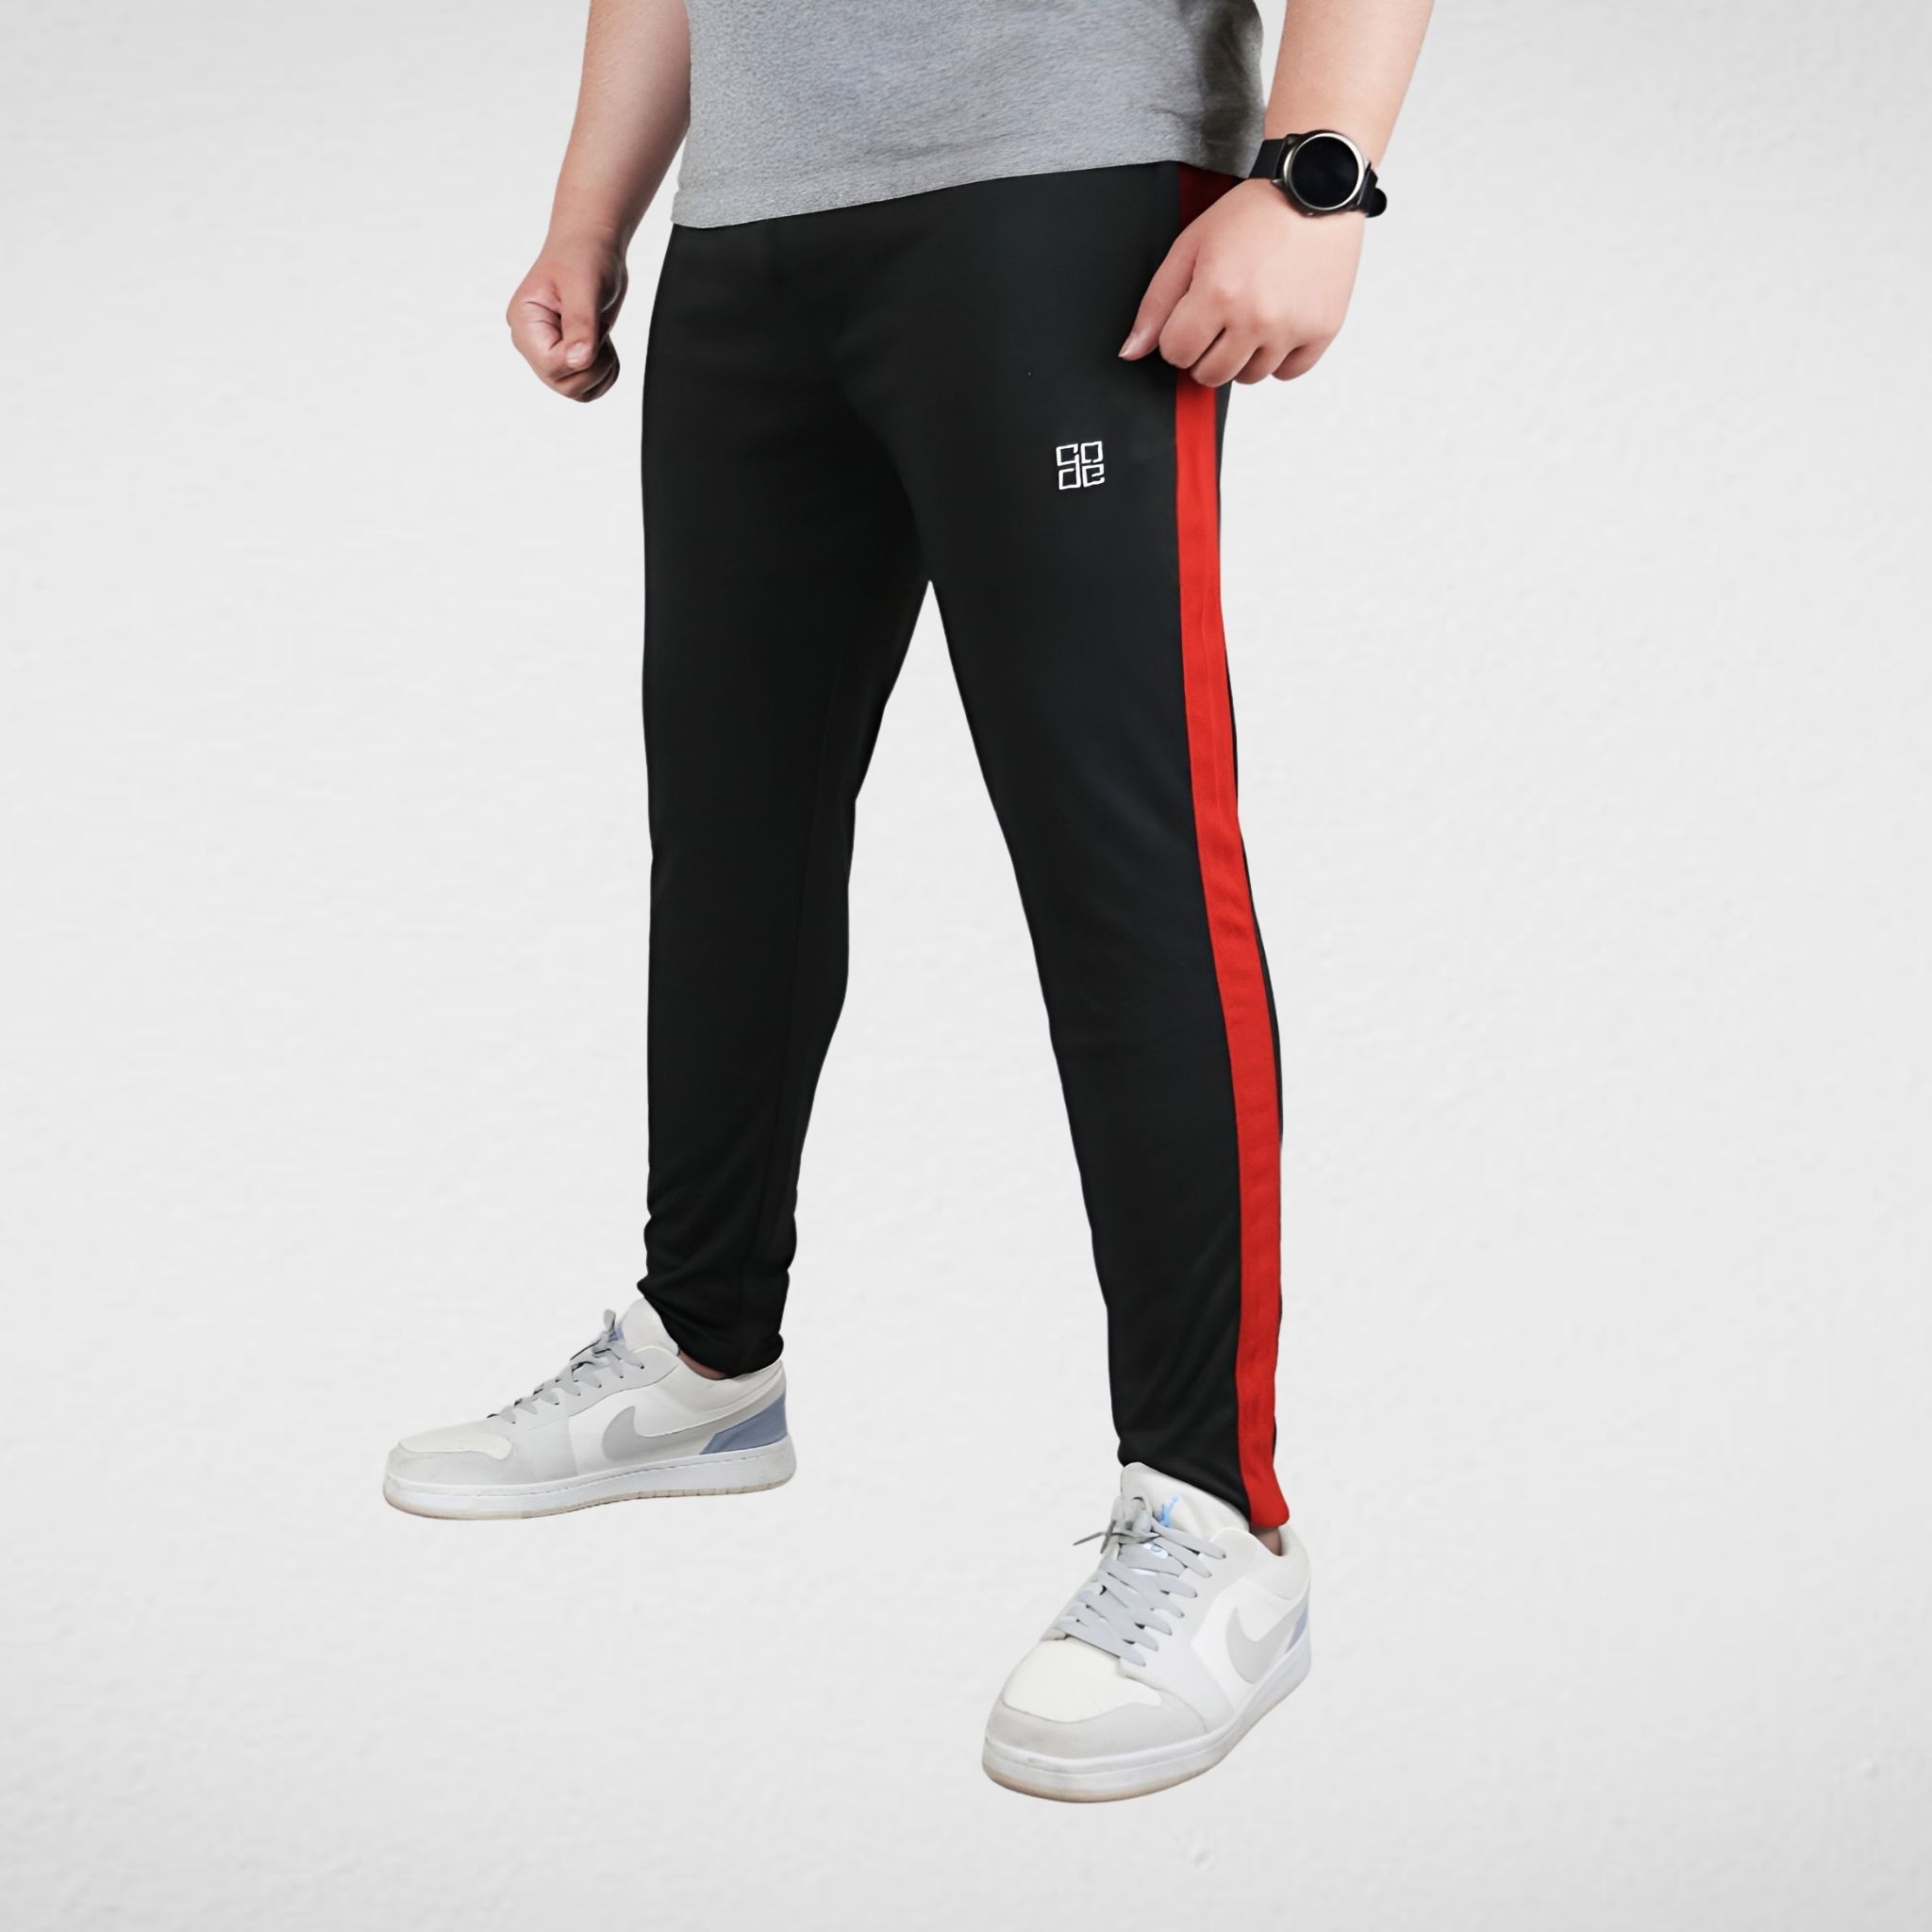 Black Trouser With Red Mesh Panel - Brocode Clothing